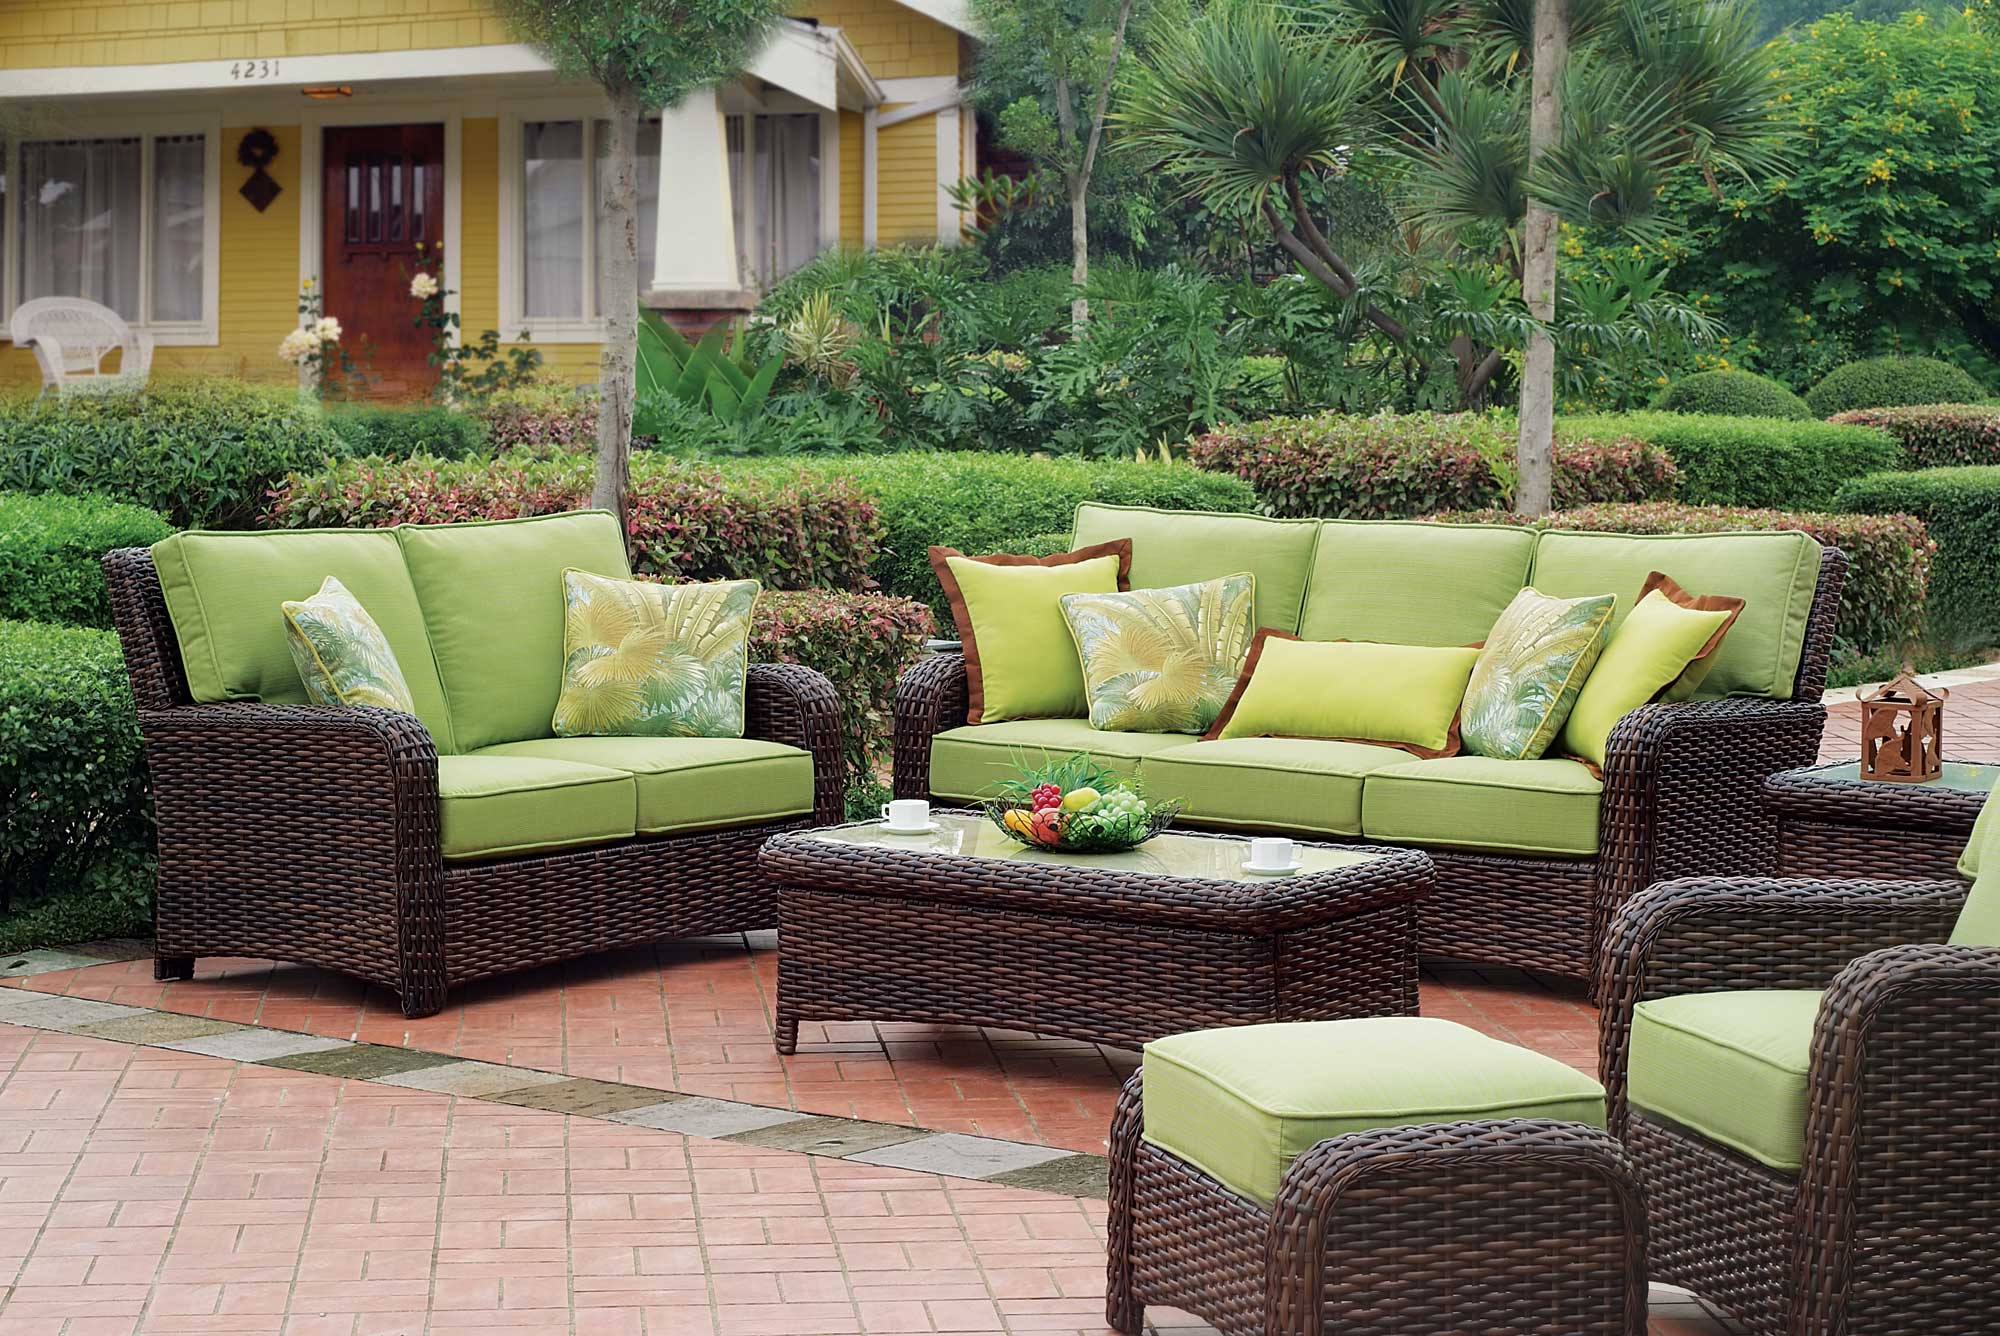 outdoor wicker furniture outdoor living: tips for keeping your rattan furniture looking new - the BYMIIZP